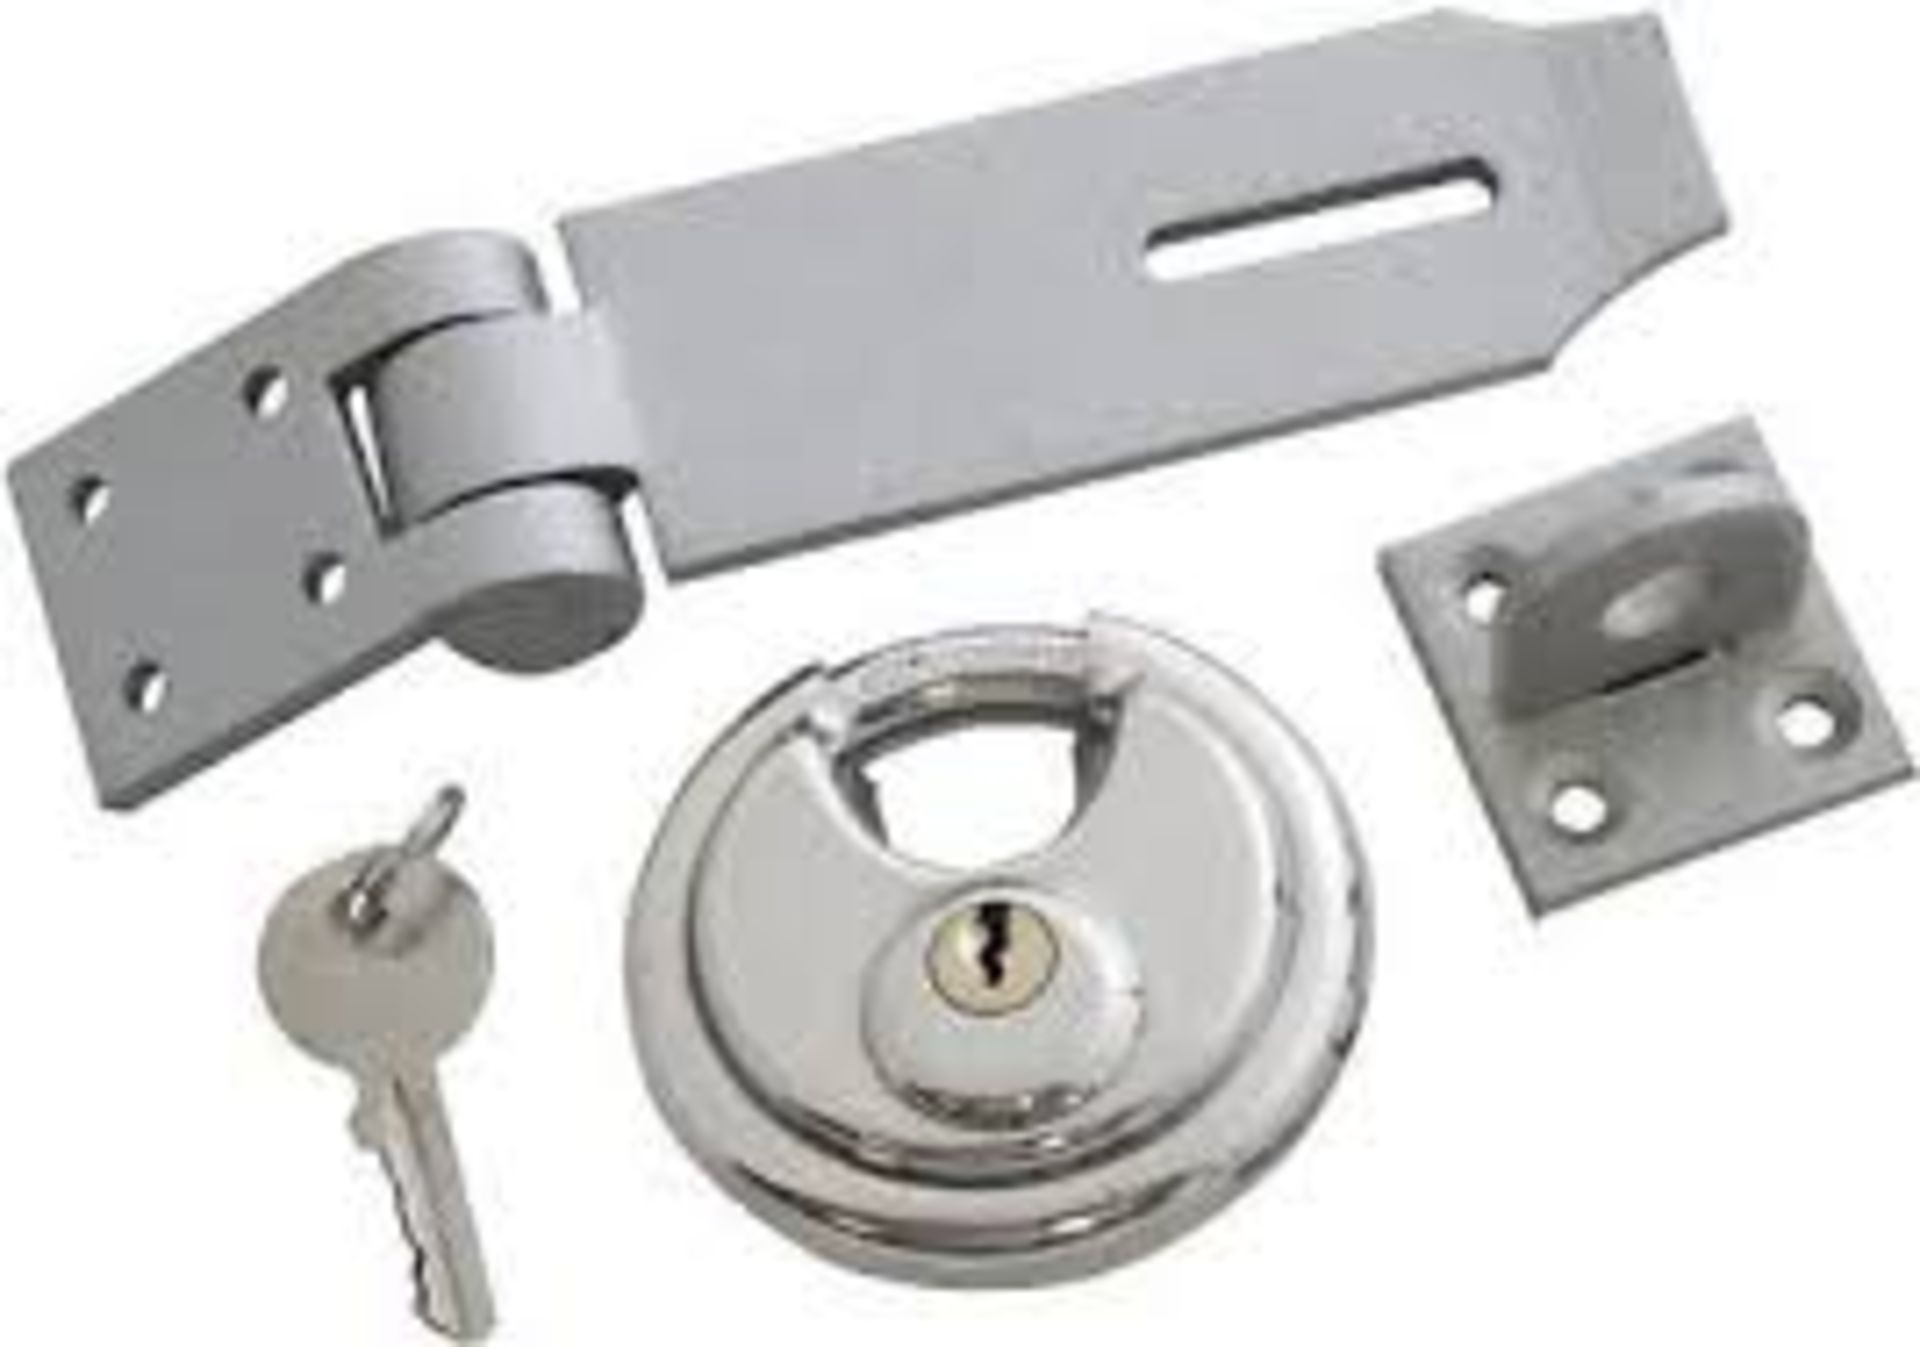 V *TRADE QTY* Brand New 70mm Disc Padlock With Hasp X 3 YOUR BID PRICE TO BE MULTIPLIED BY THREE